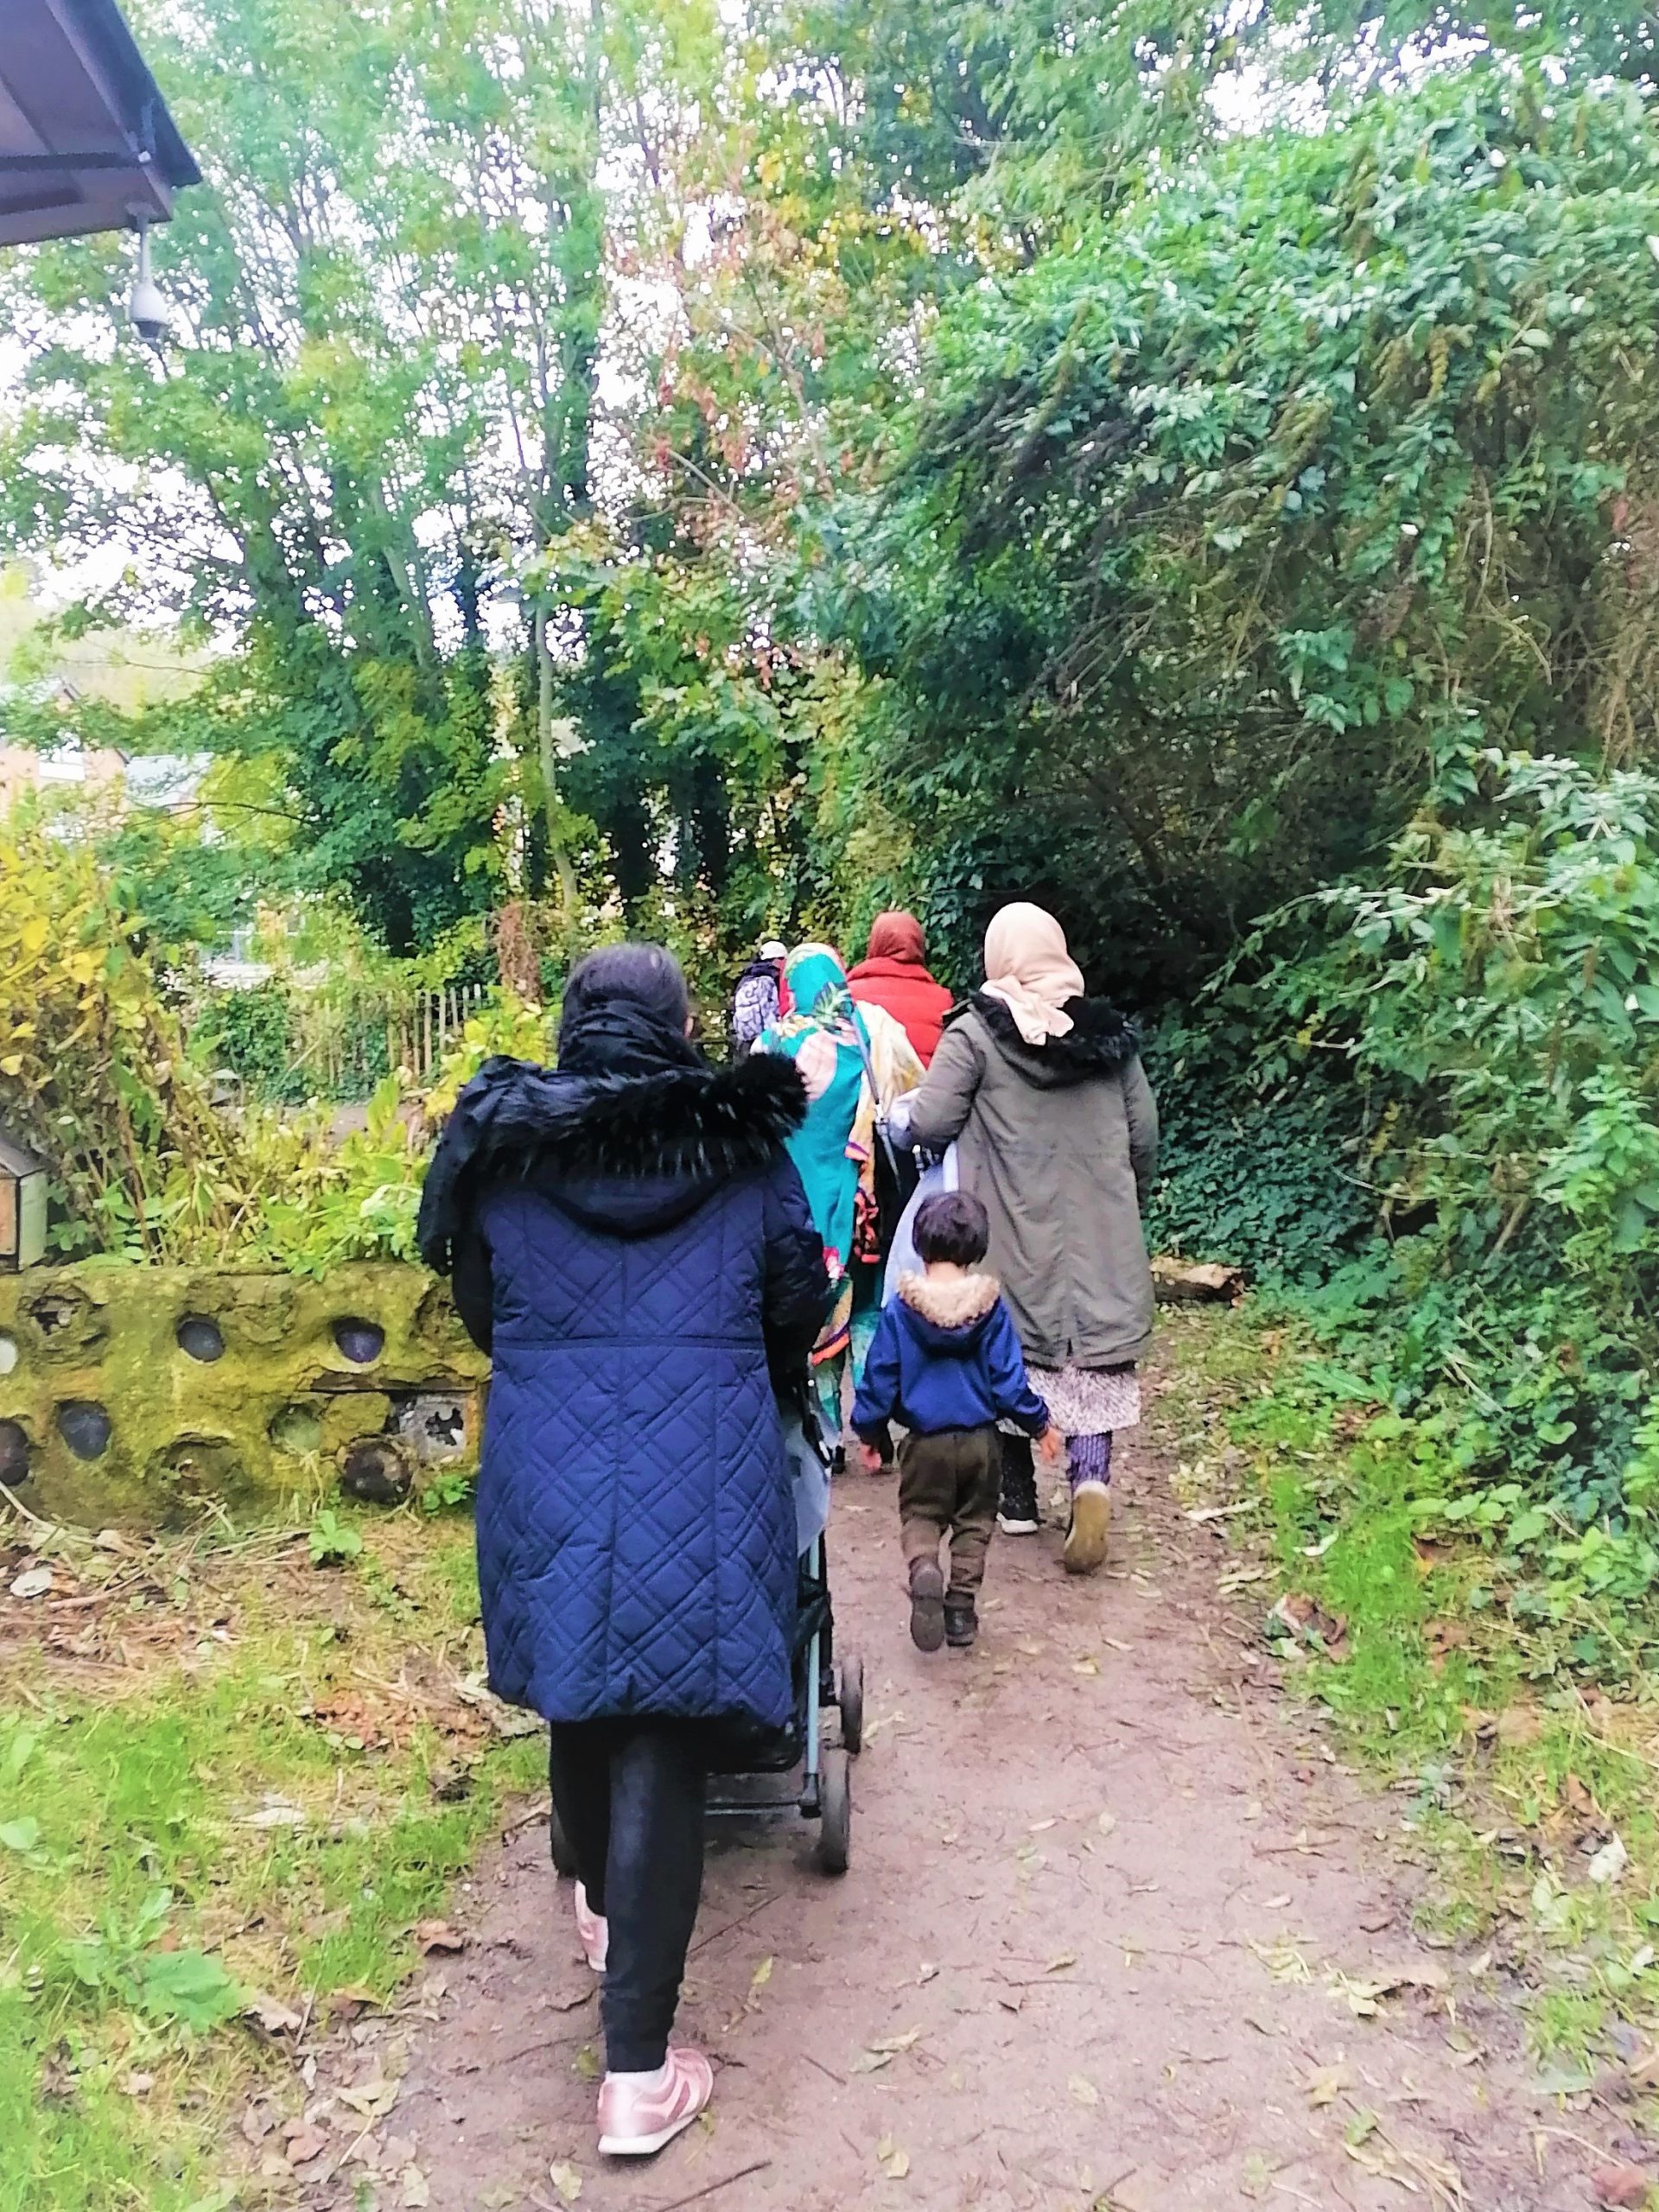 A group of women and children walk along a woodland path.